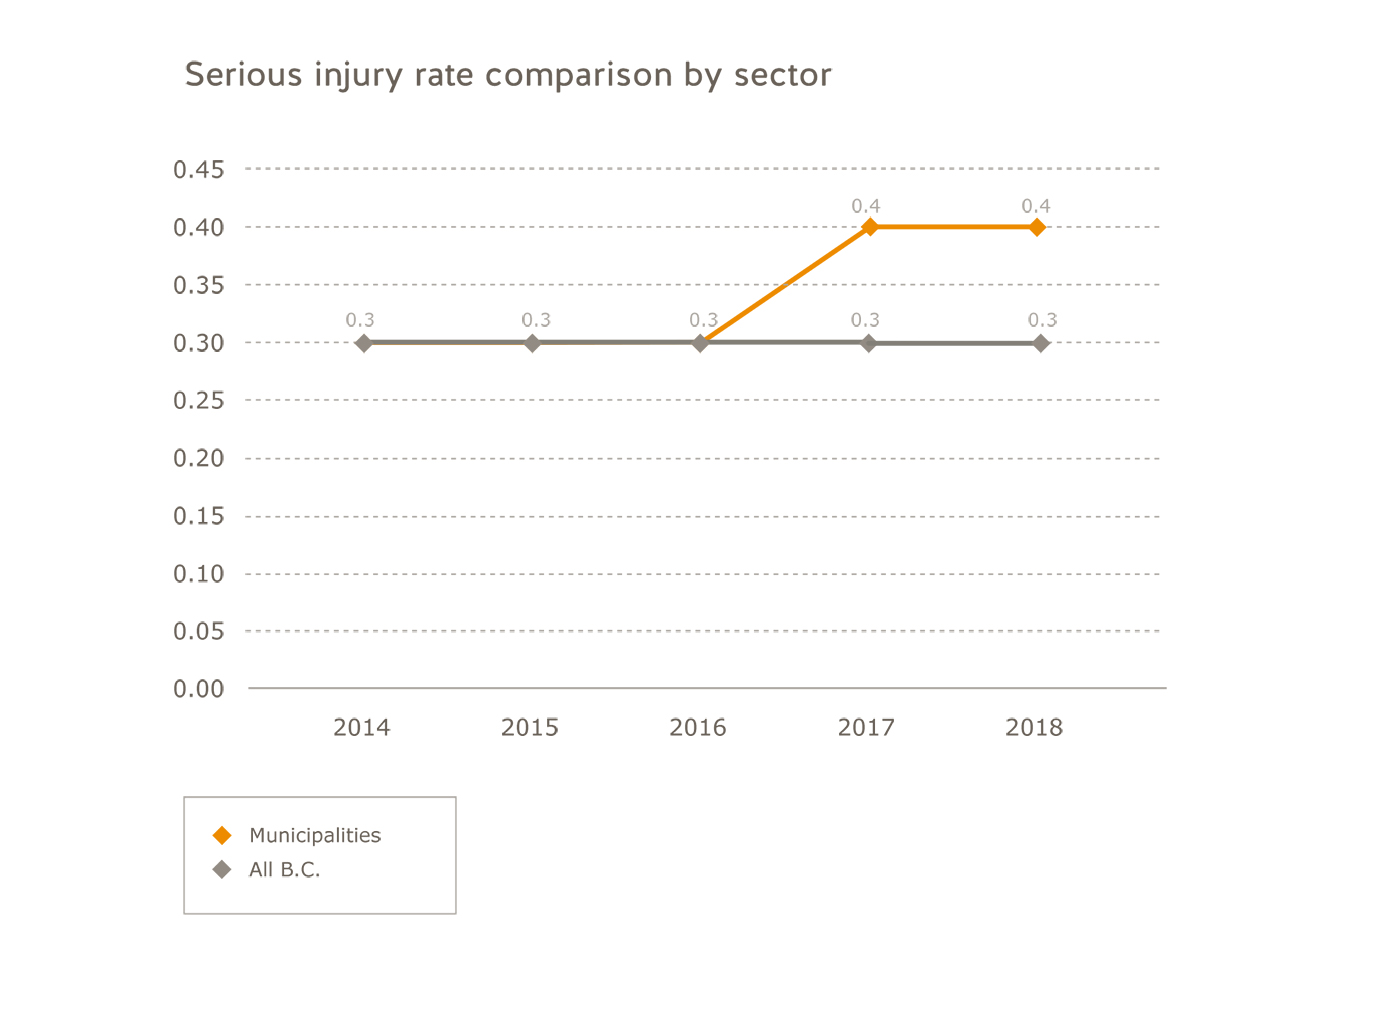 Municipalities serious injury rate comparison by sector for 2014 to 2018. All B.C.: 2014=0.3; 2015=0.3; 2016=0.3; 2017=0.3; 2018=0.3.  Municipalities=2016=0.3; 2017=0.4; 2018=0.4